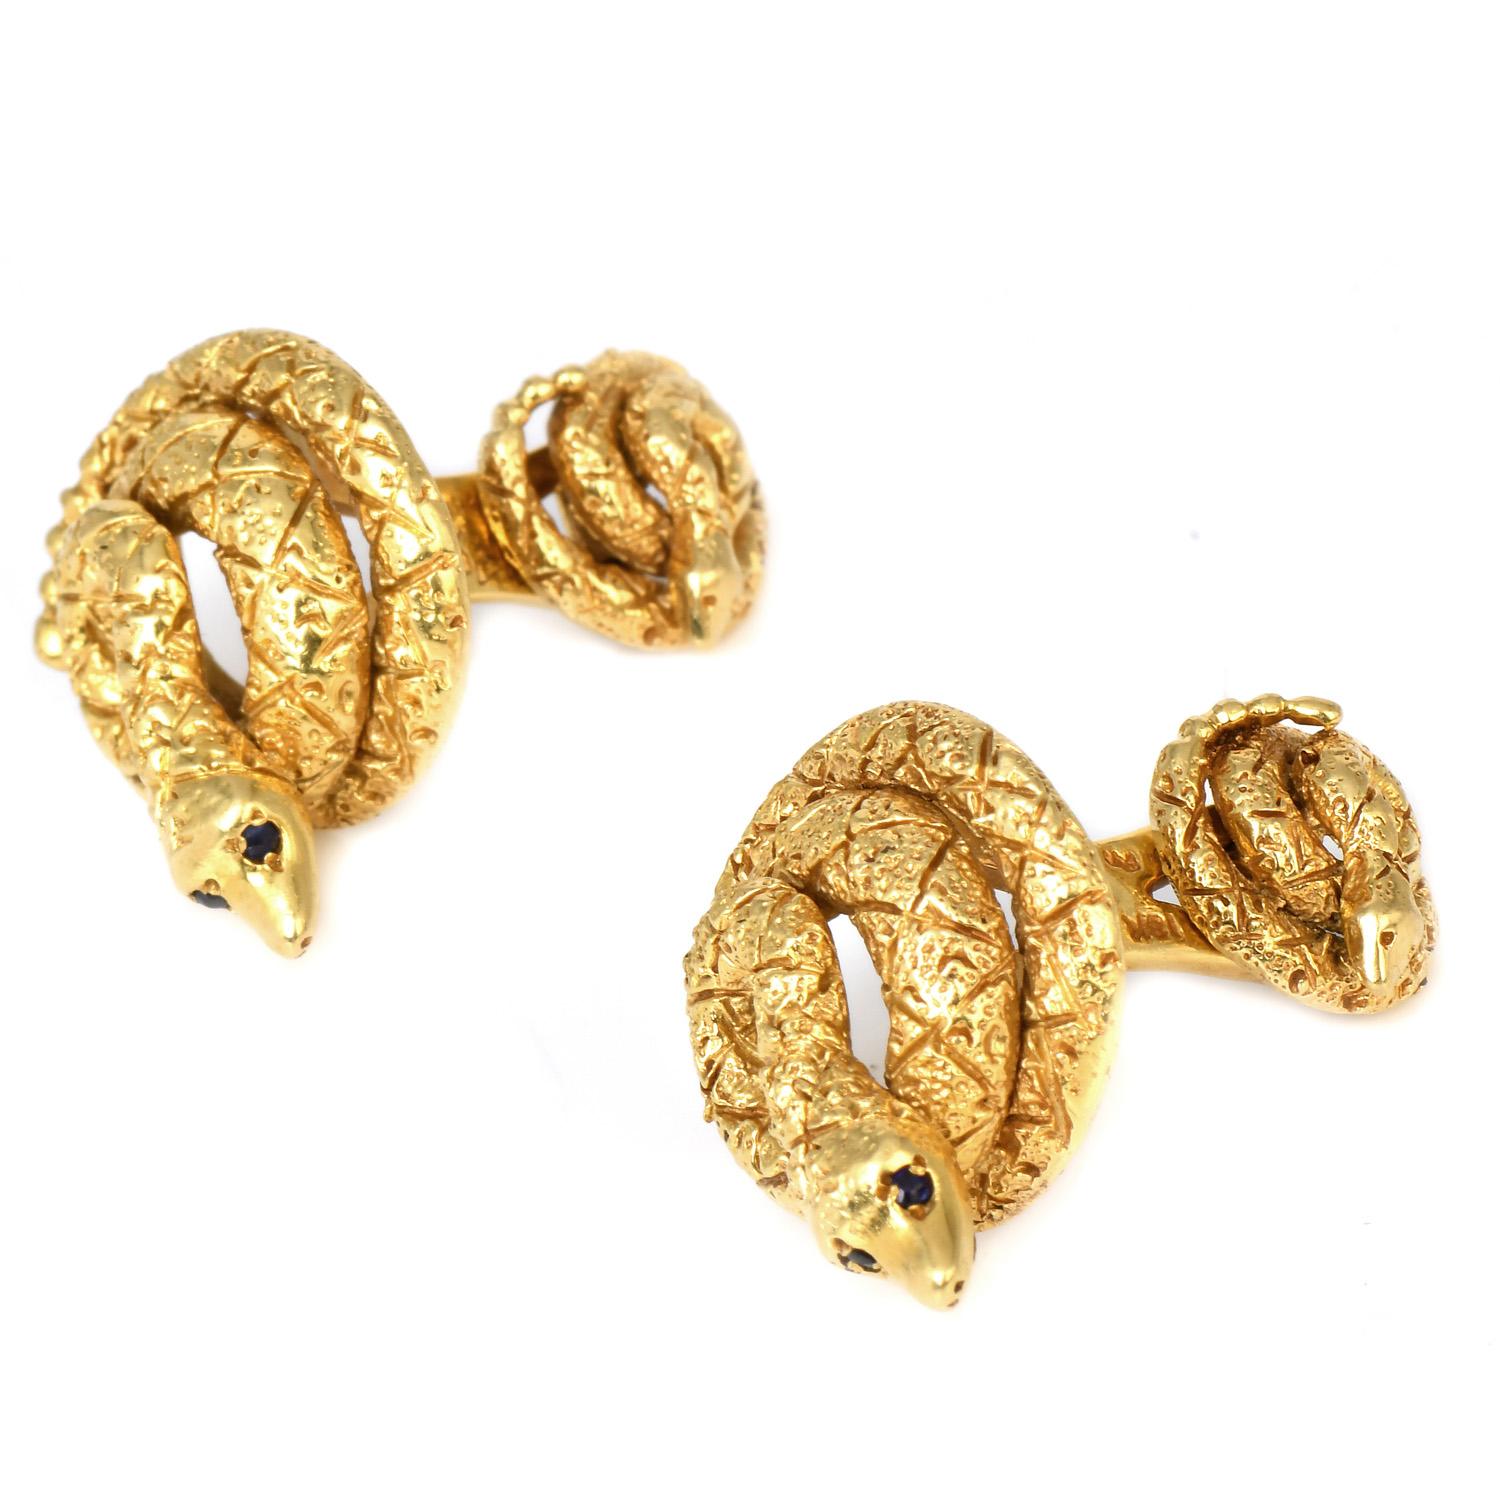 These Handsome Vintage CARTIER cufflinks were inspired in a 

snake motif and crafted in 18K yellow gold.

Weighing approx. 21.9 grams and measuring appx. 22 x 20mm. 

Signed cartier and numbered.

Remain in Excellent Condition.

Accompanied by a